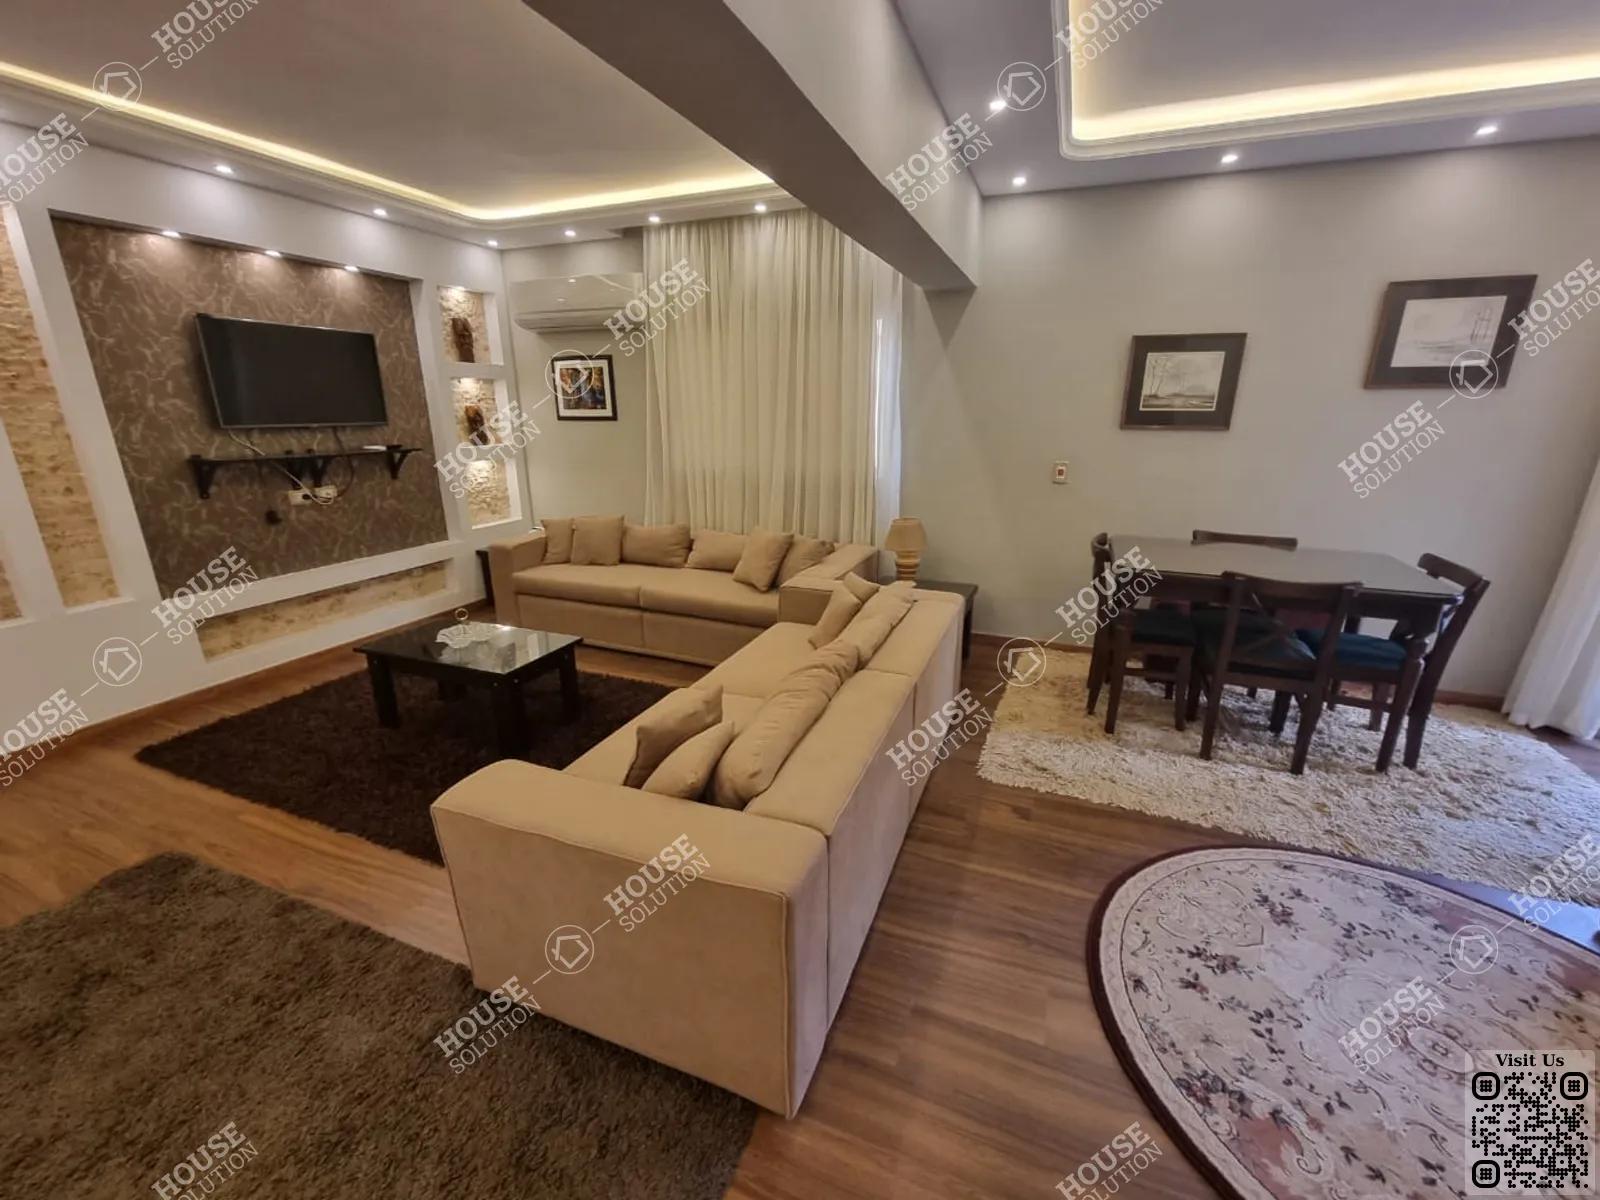 RECEPTION  @ Apartments For Rent In Maadi Maadi Degla Area: 110 m² consists of 2 Bedrooms 2 Bathrooms Modern furnished 5 stars #5576-0